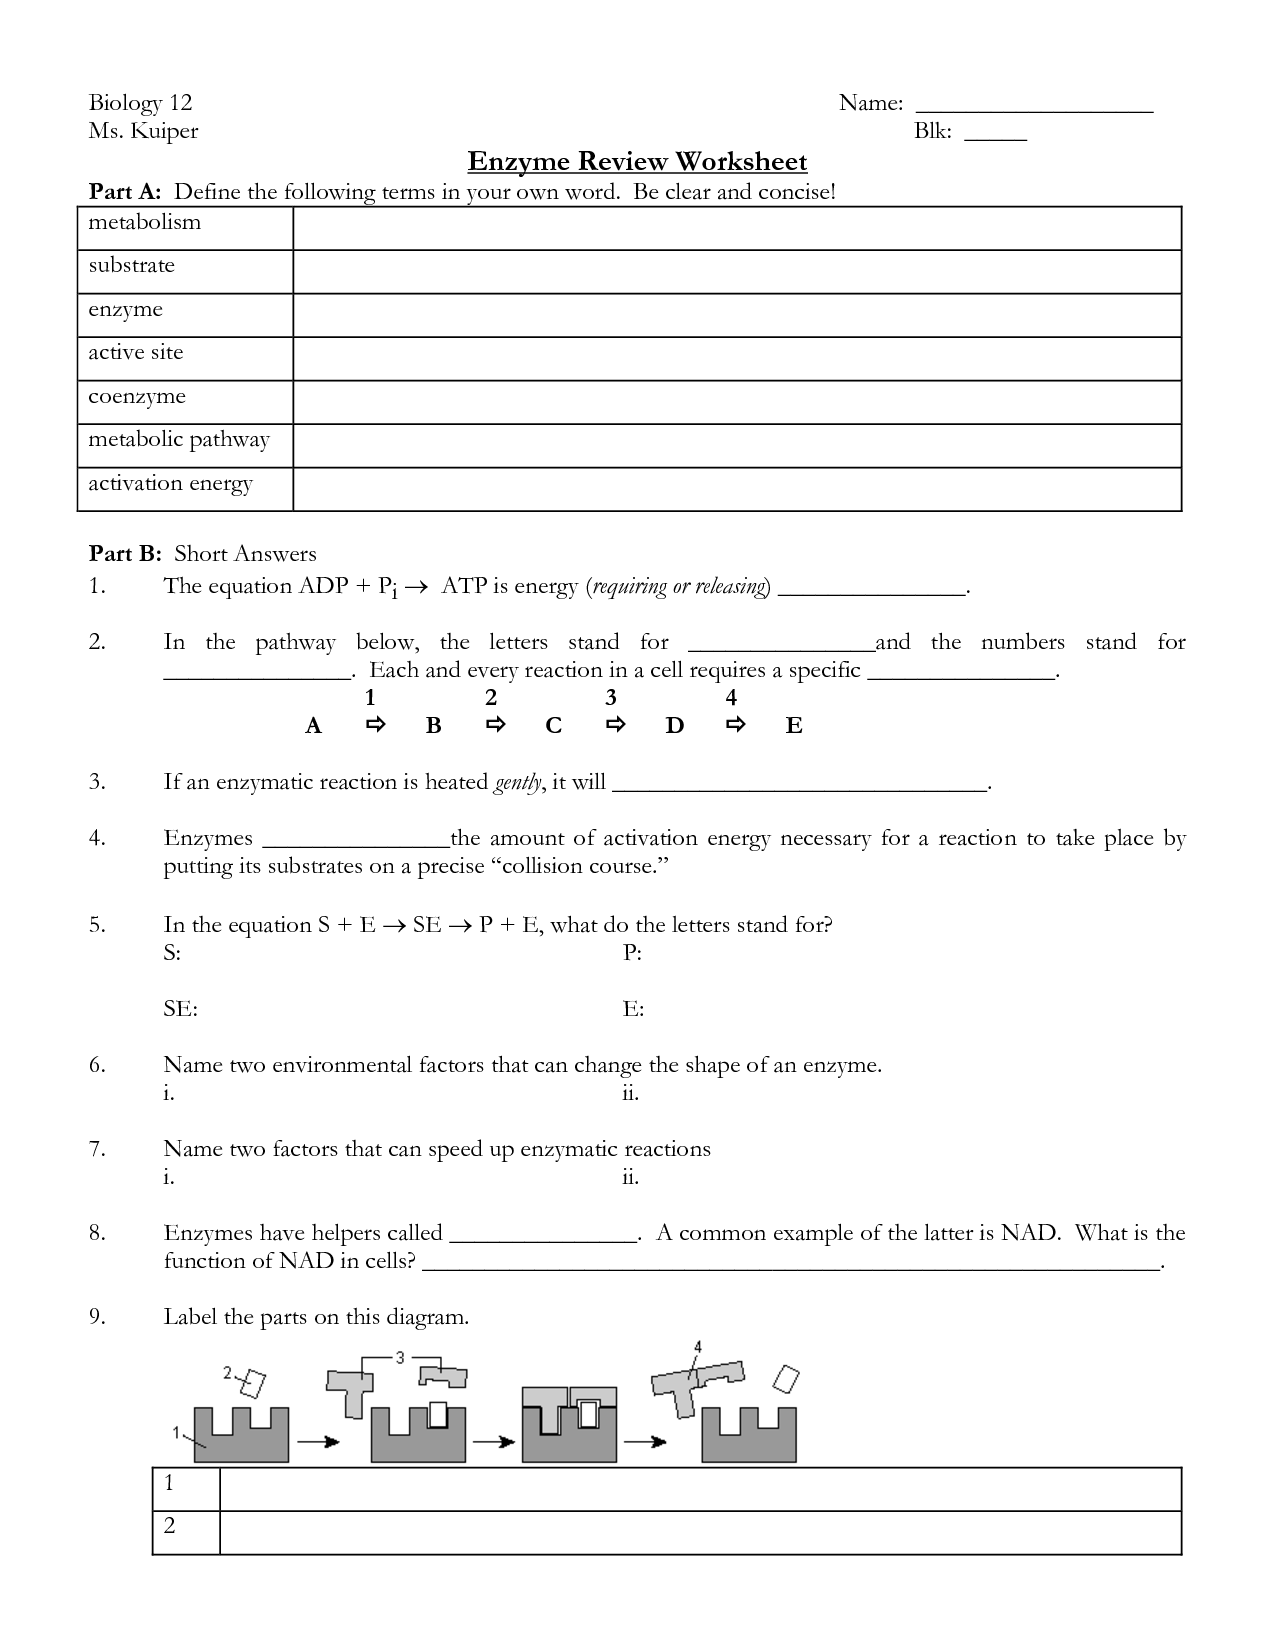 20 Best Images of Enzymes And Chemical Reactions Worksheet  Chemical Reactions and Enzymes 